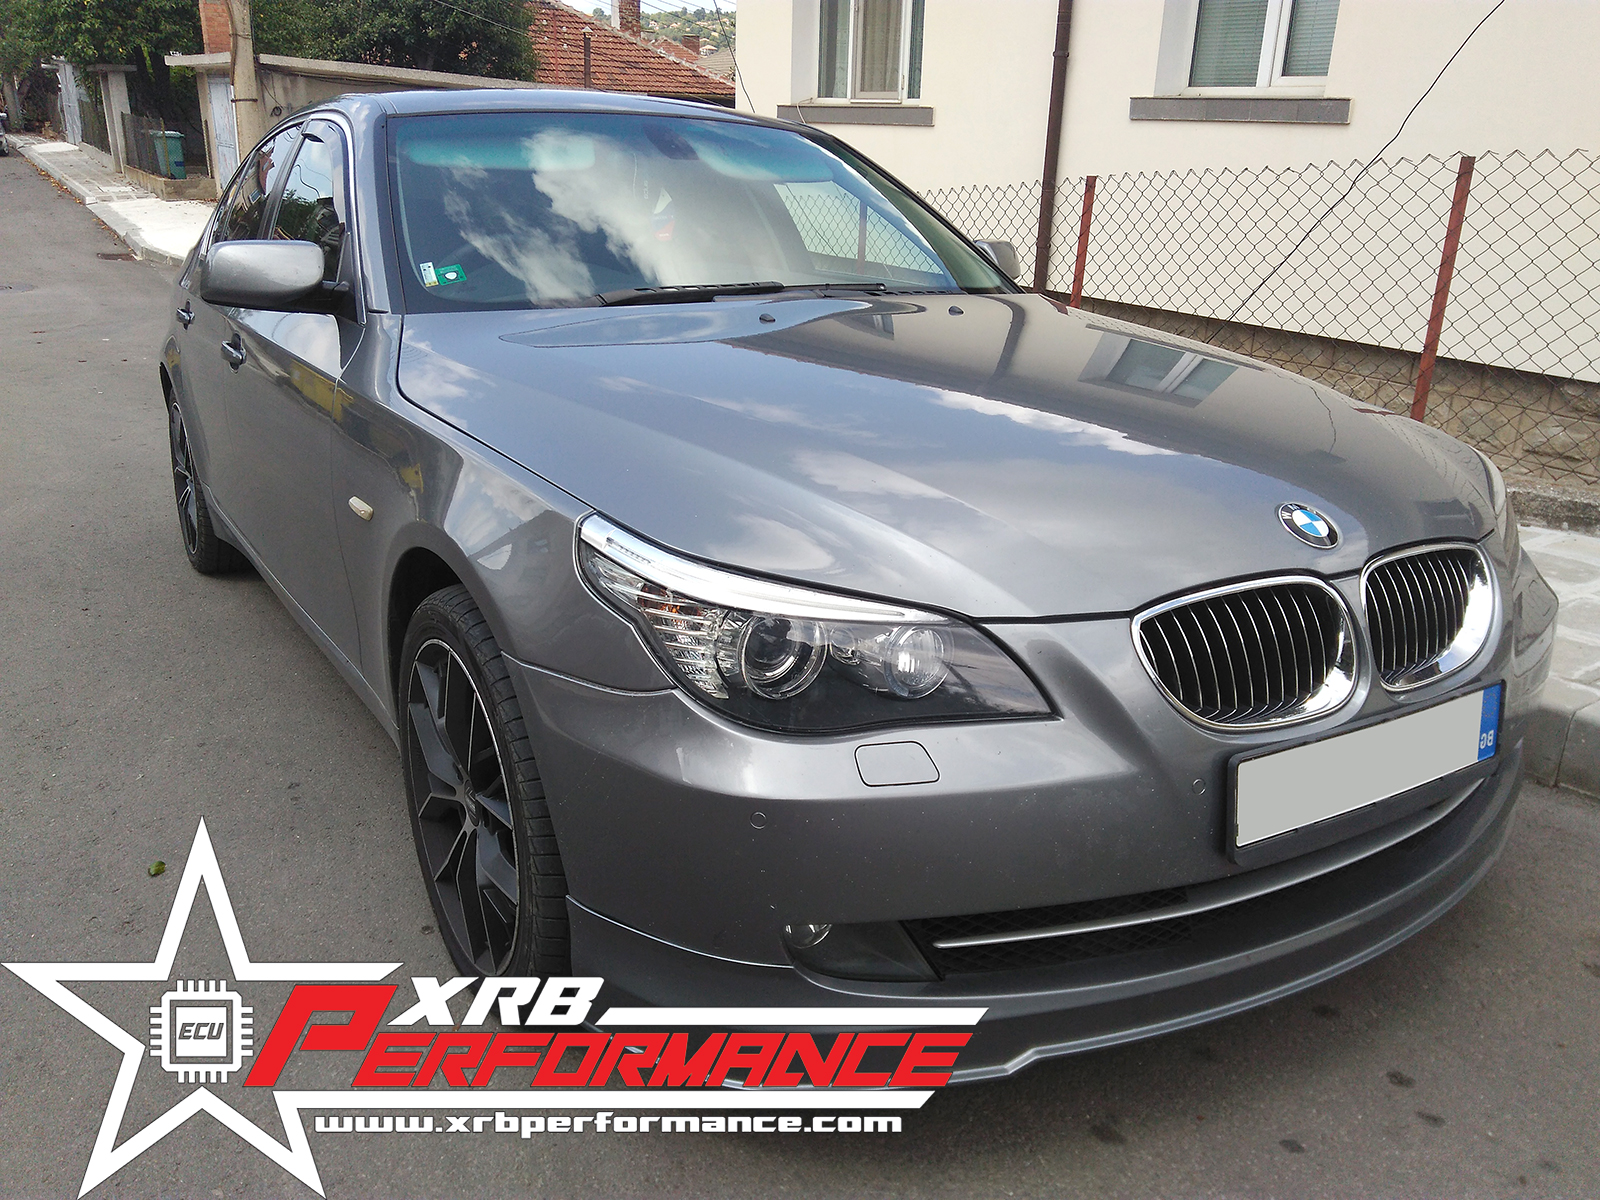 BMW E60 530xd XRB Performance Remap and Chip Tuning